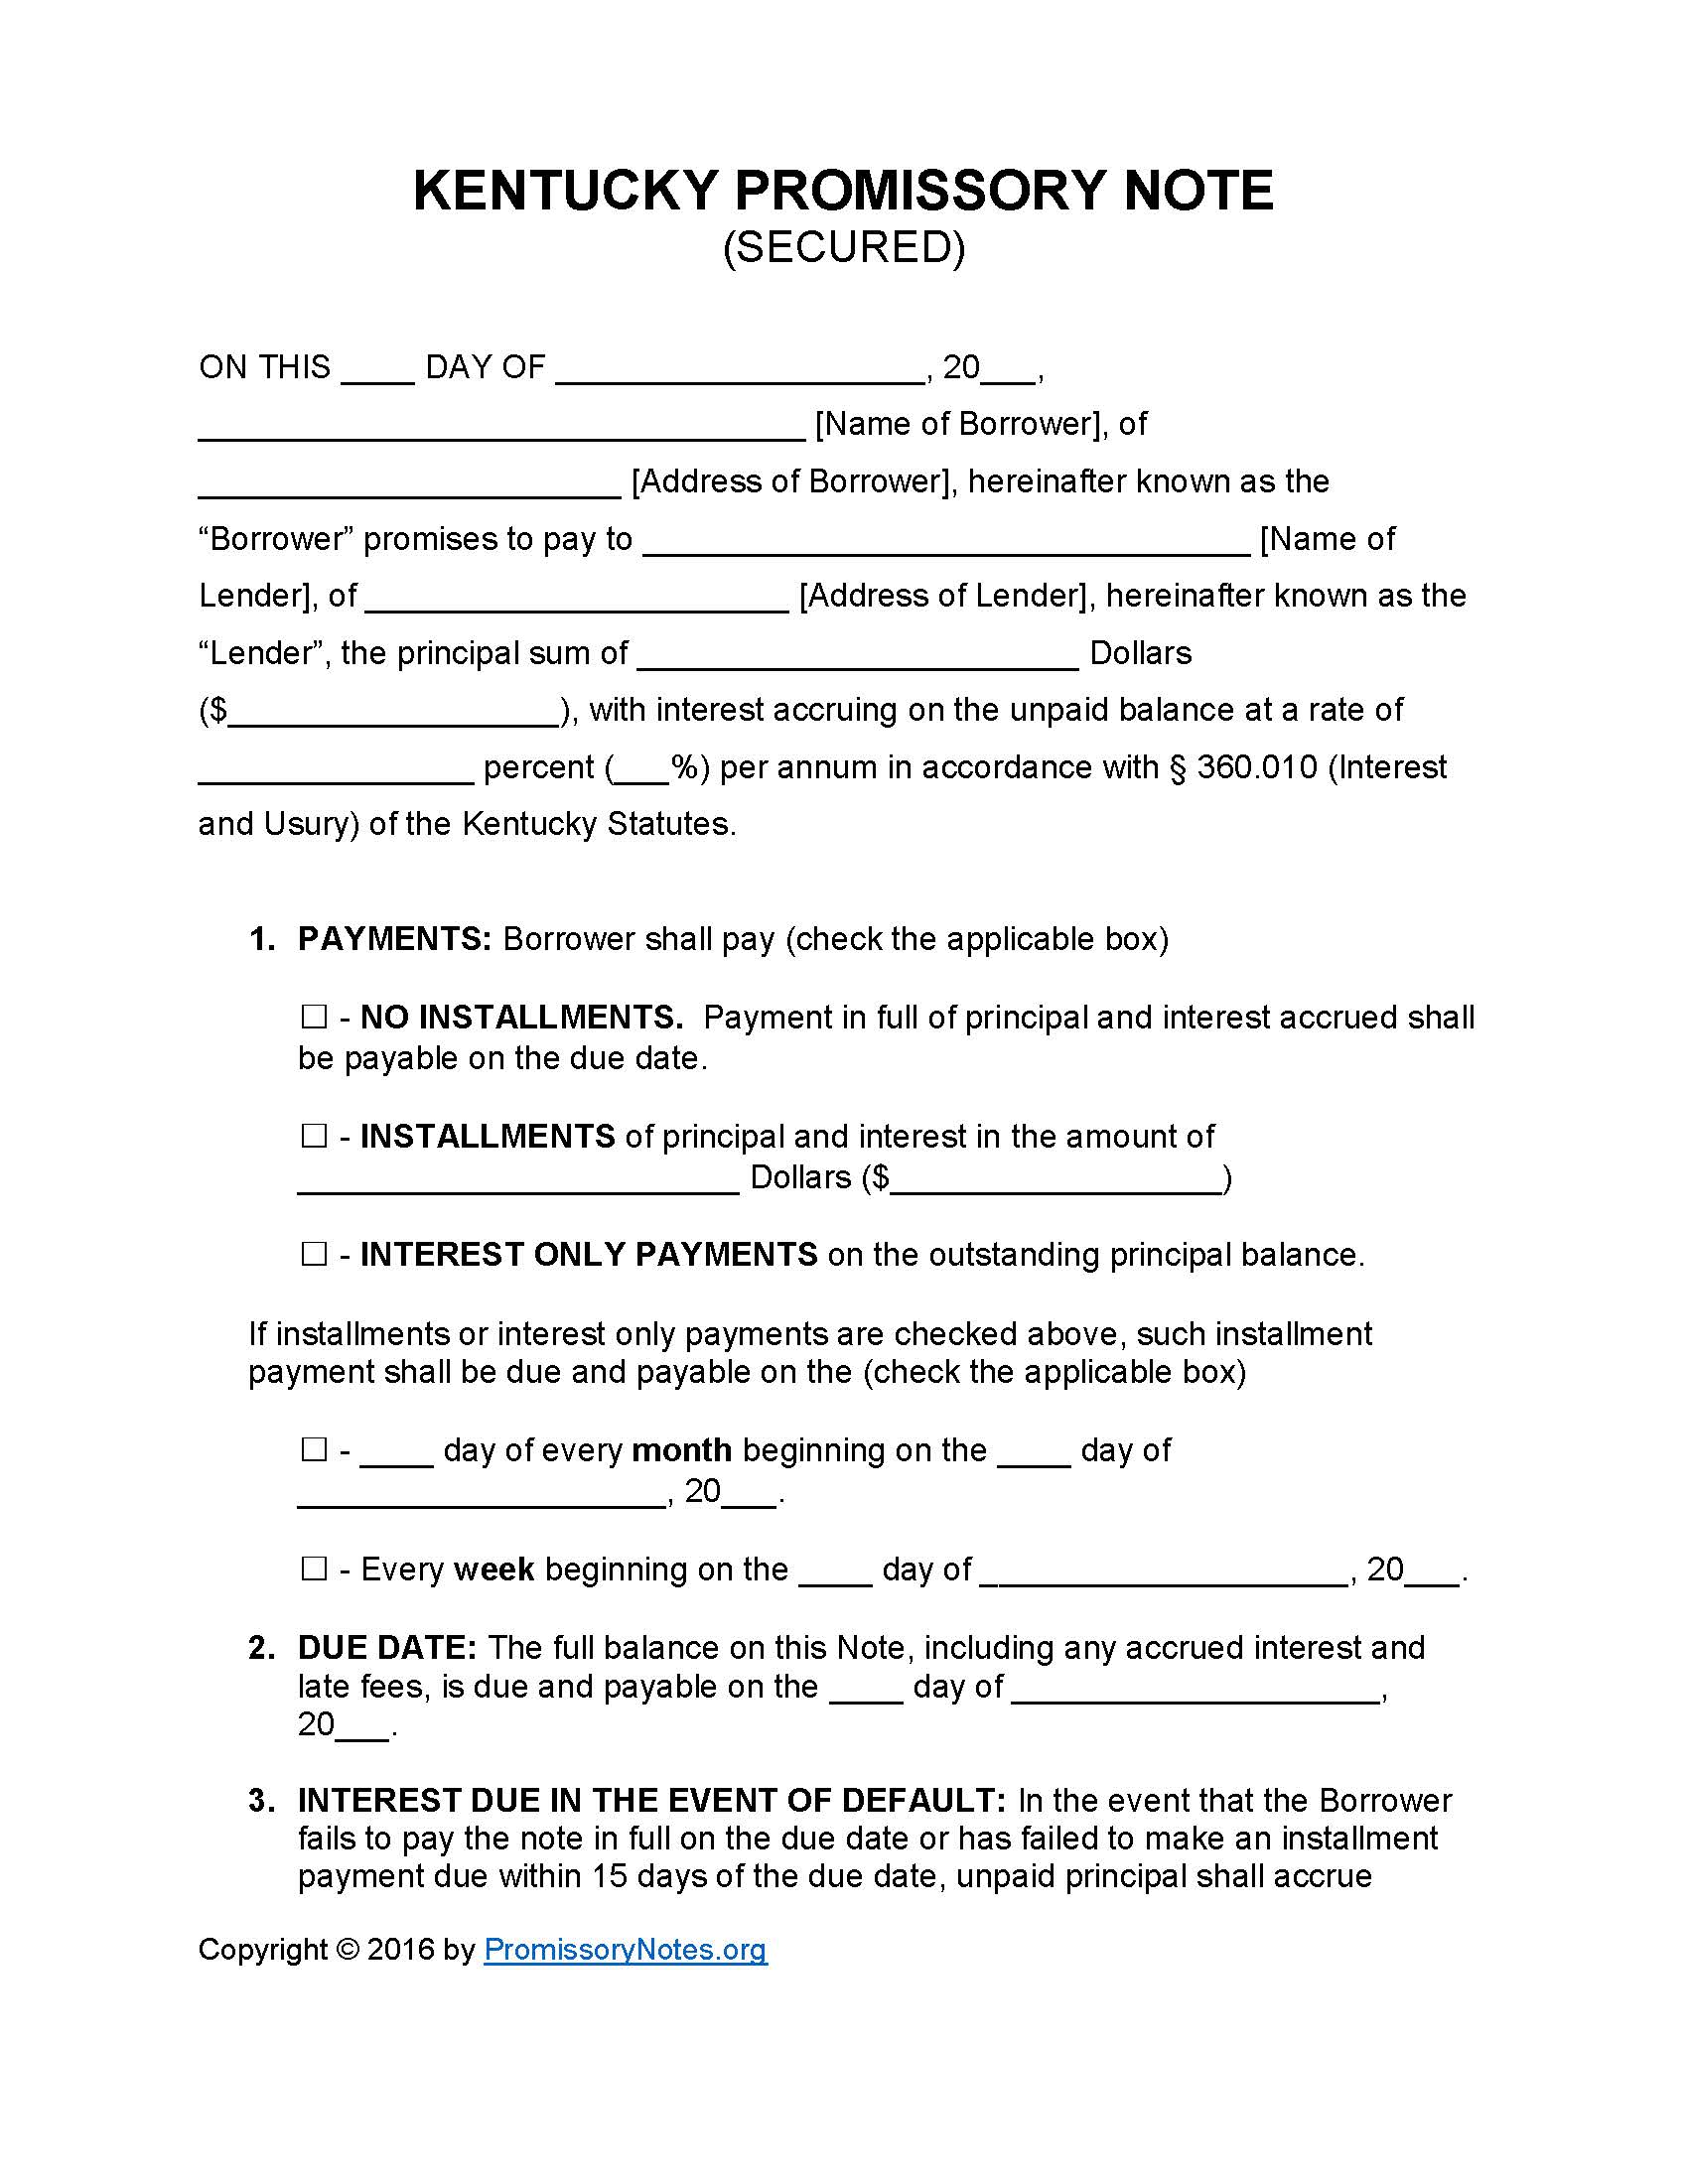 Kentucky Secured Promissory Note Template - Promissory Notes Inside Promissory Notes Template